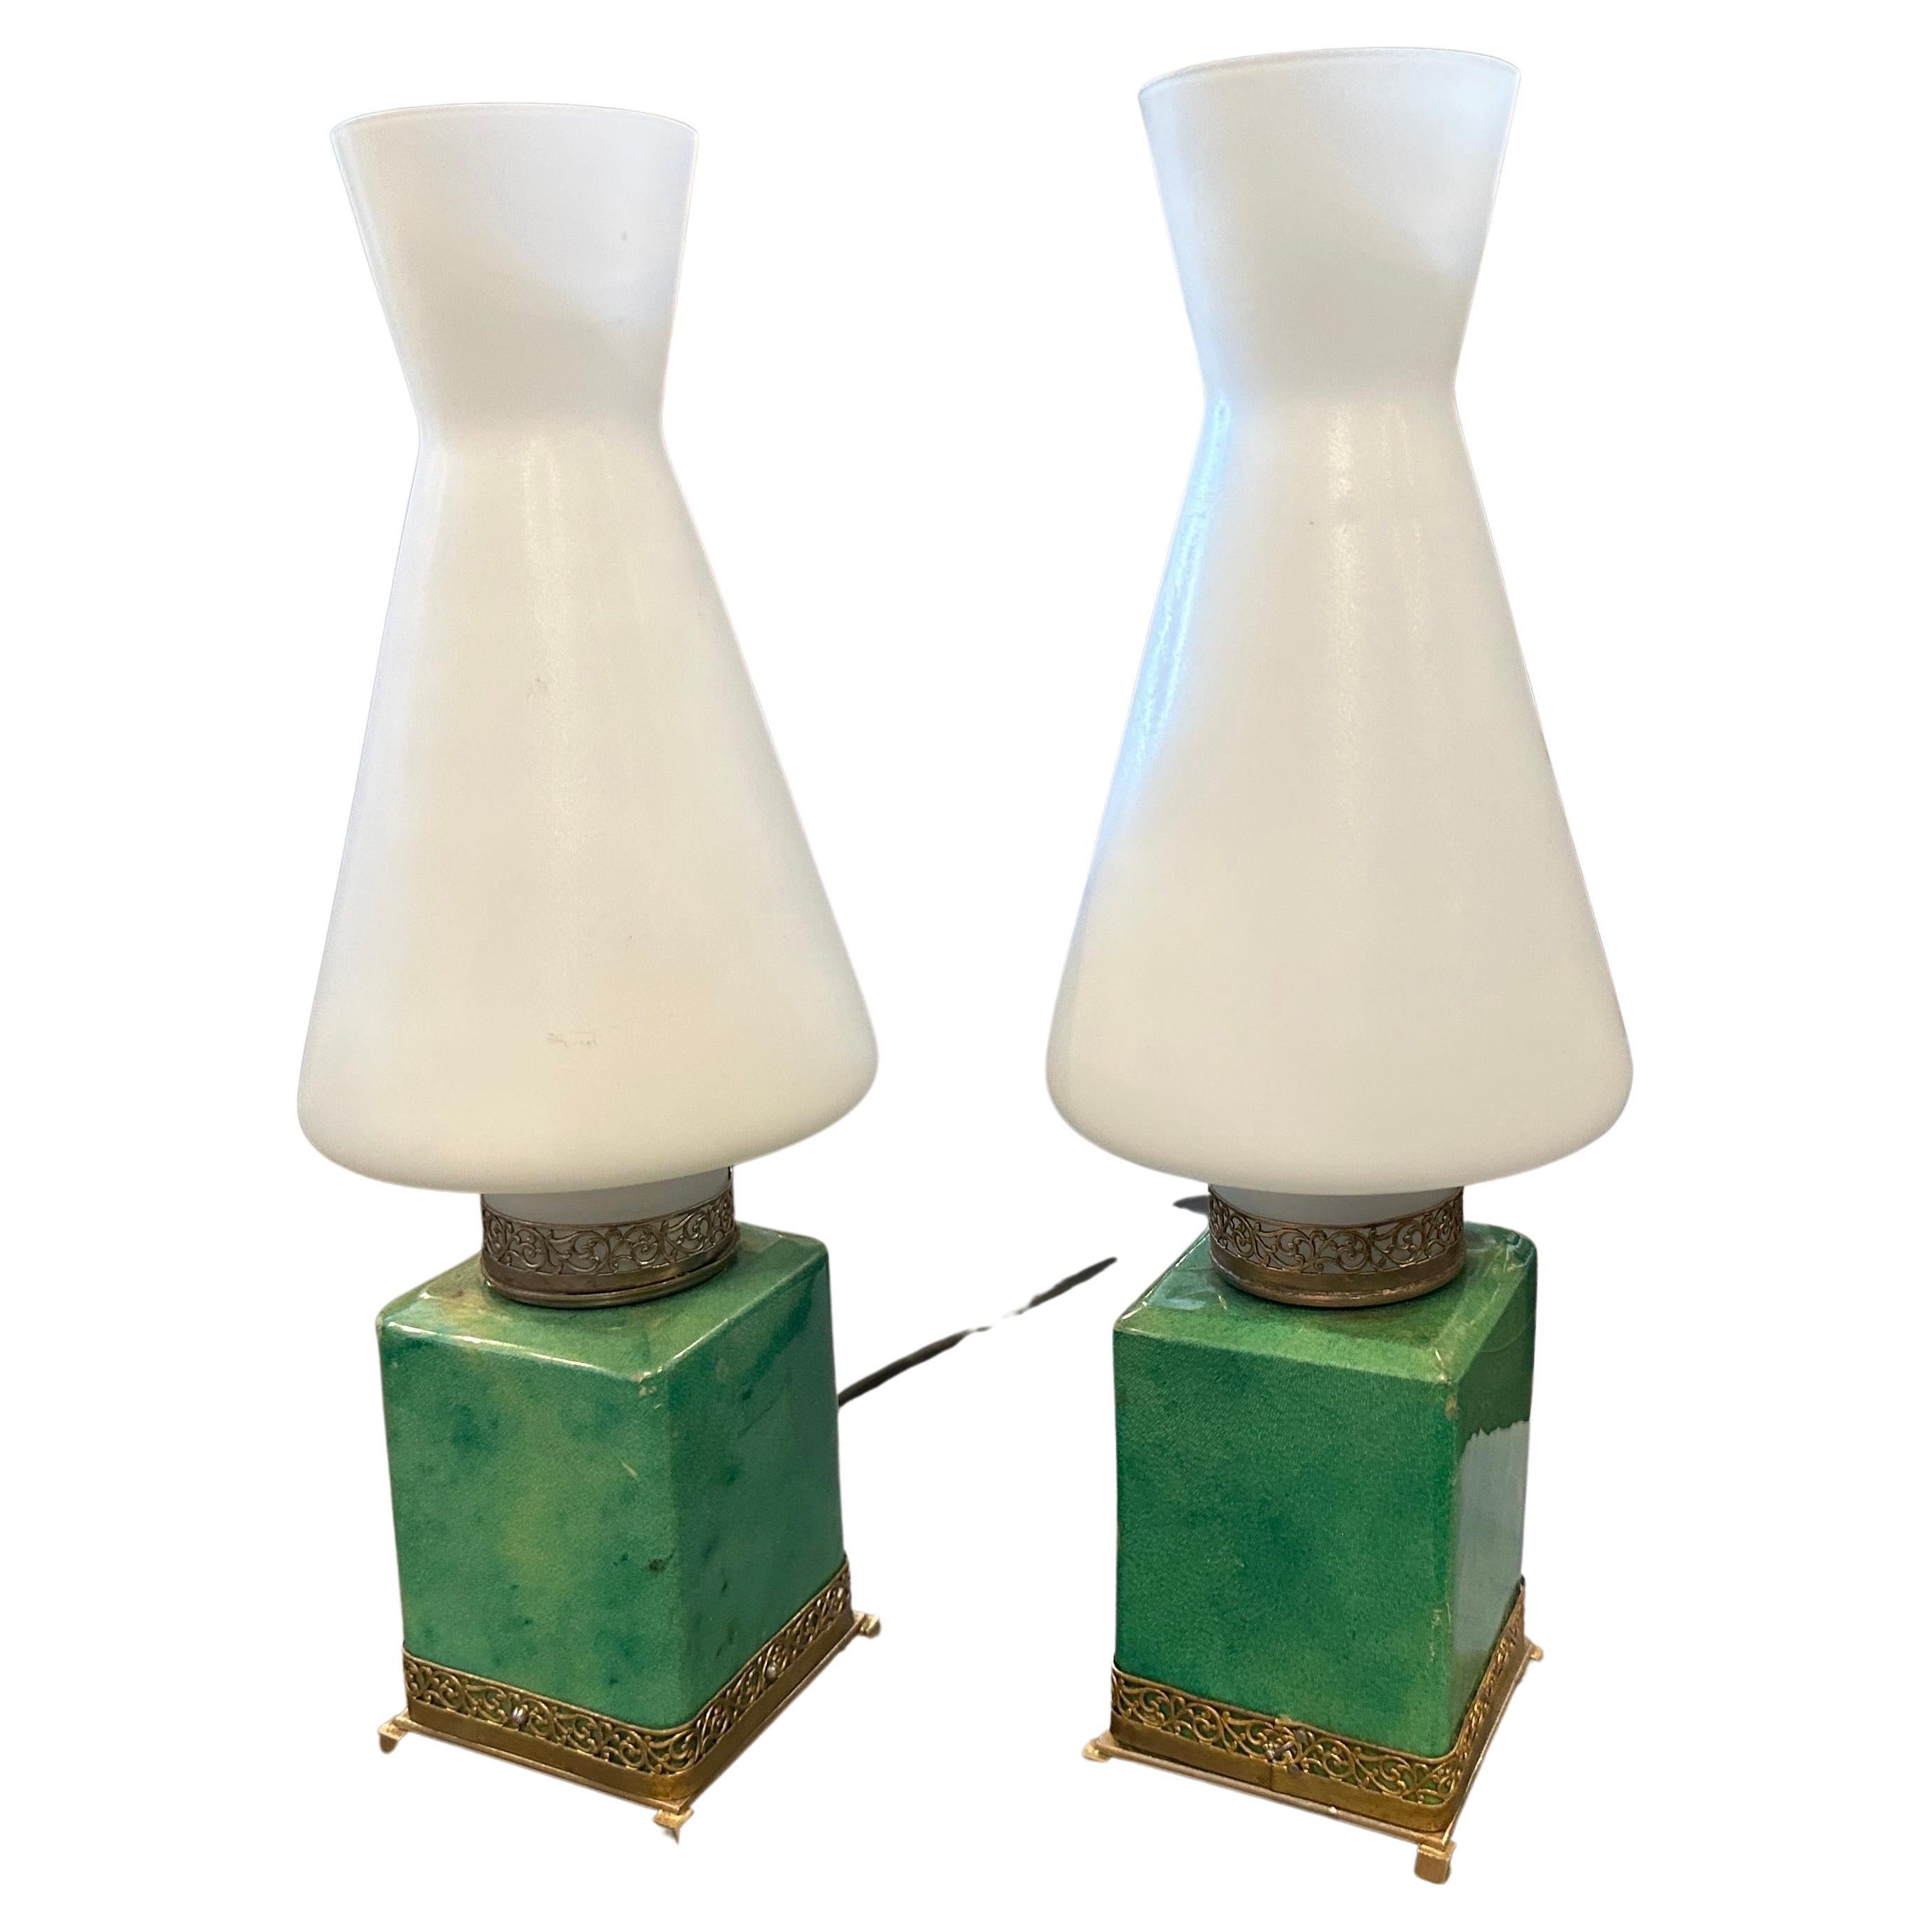 1950s Pair of Mid-Century Modern Brass and Green Goatskin Bed Lamps by Aldo Tura